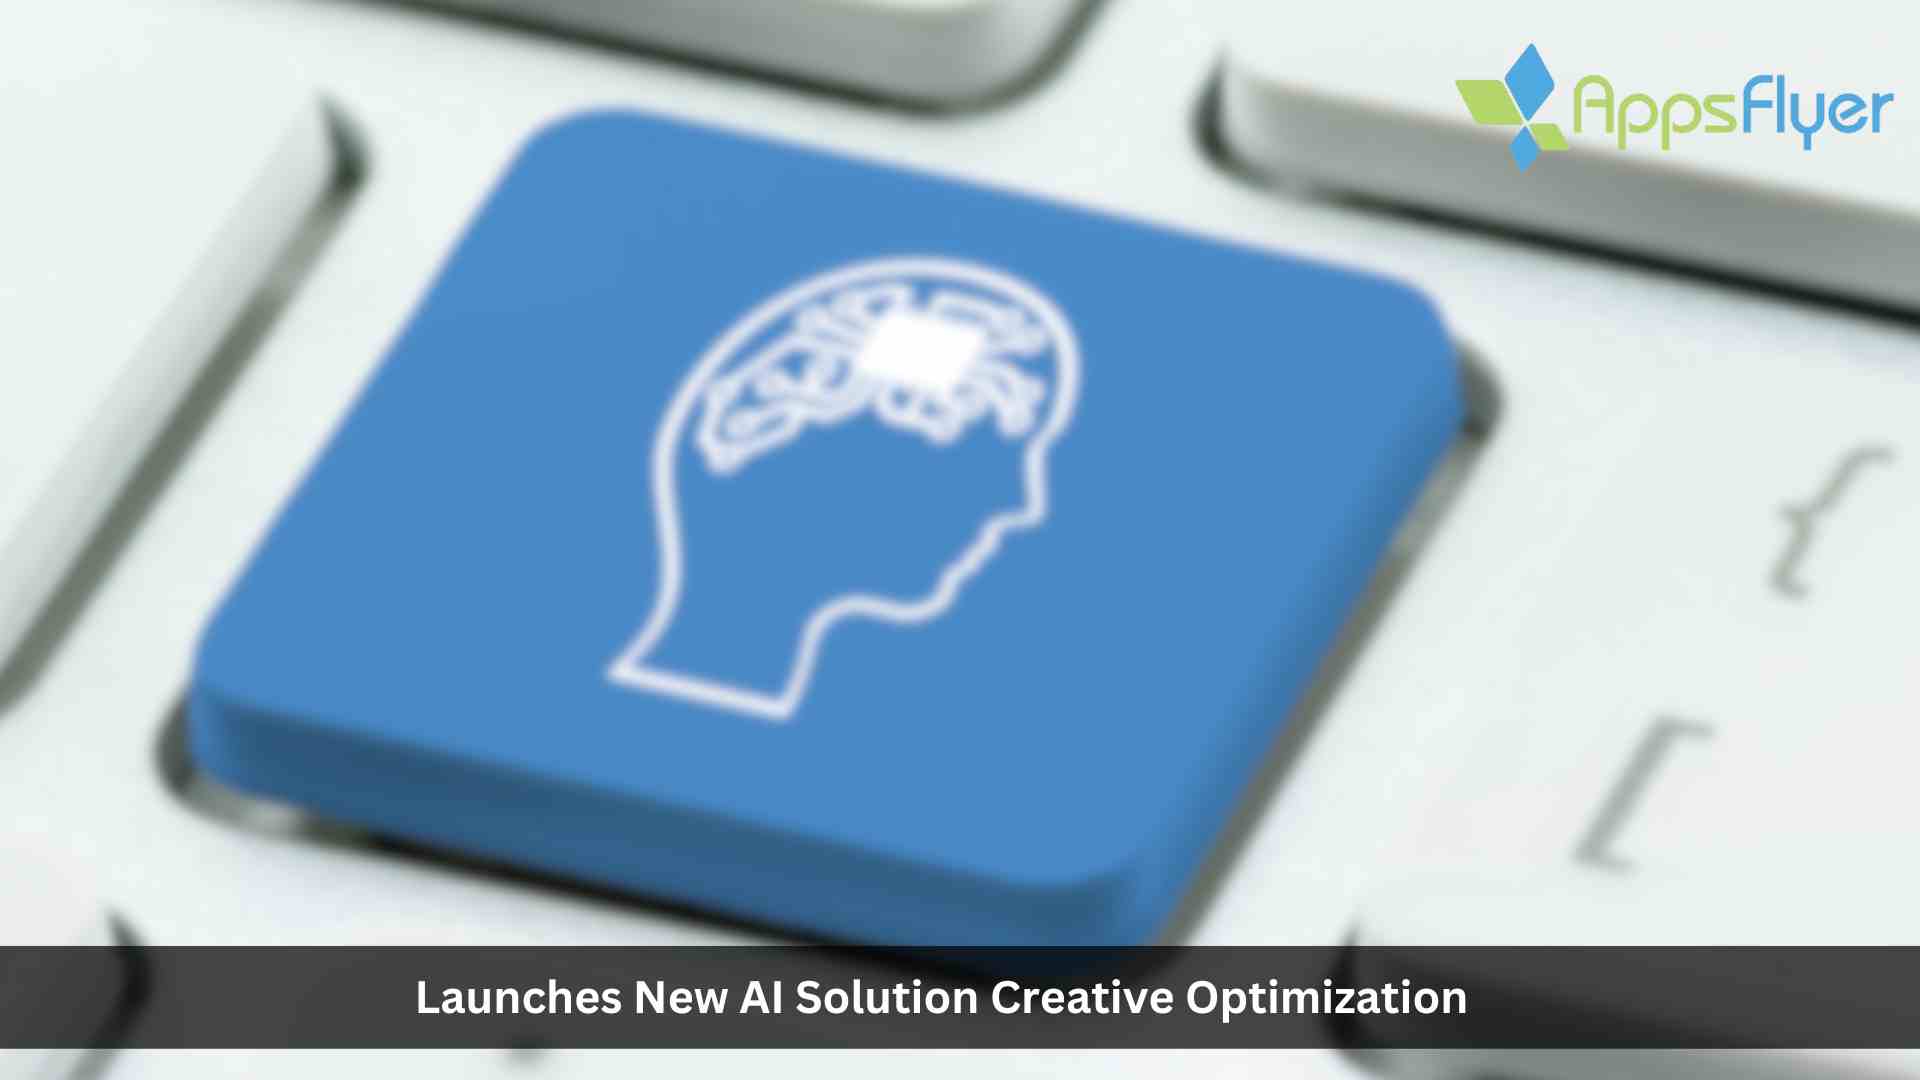 AppsFlyer Launches New AI Solution to Enhance Creative Process and Performance of Marketing Campaigns